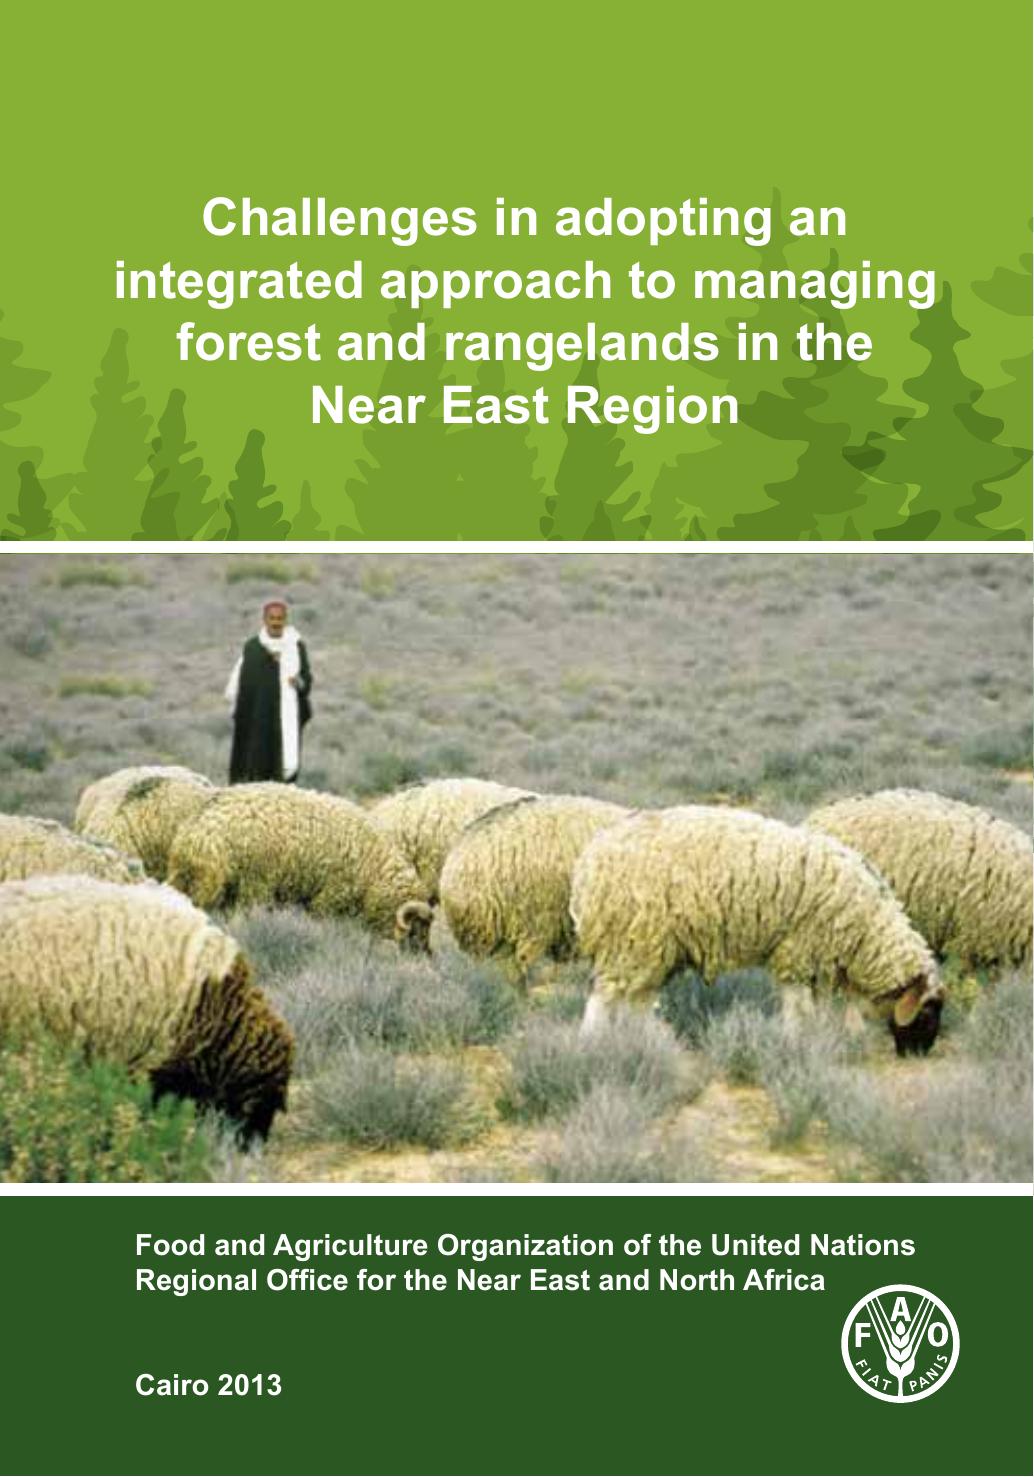 Challenges in adopting integrated approaches in rangelands 2013